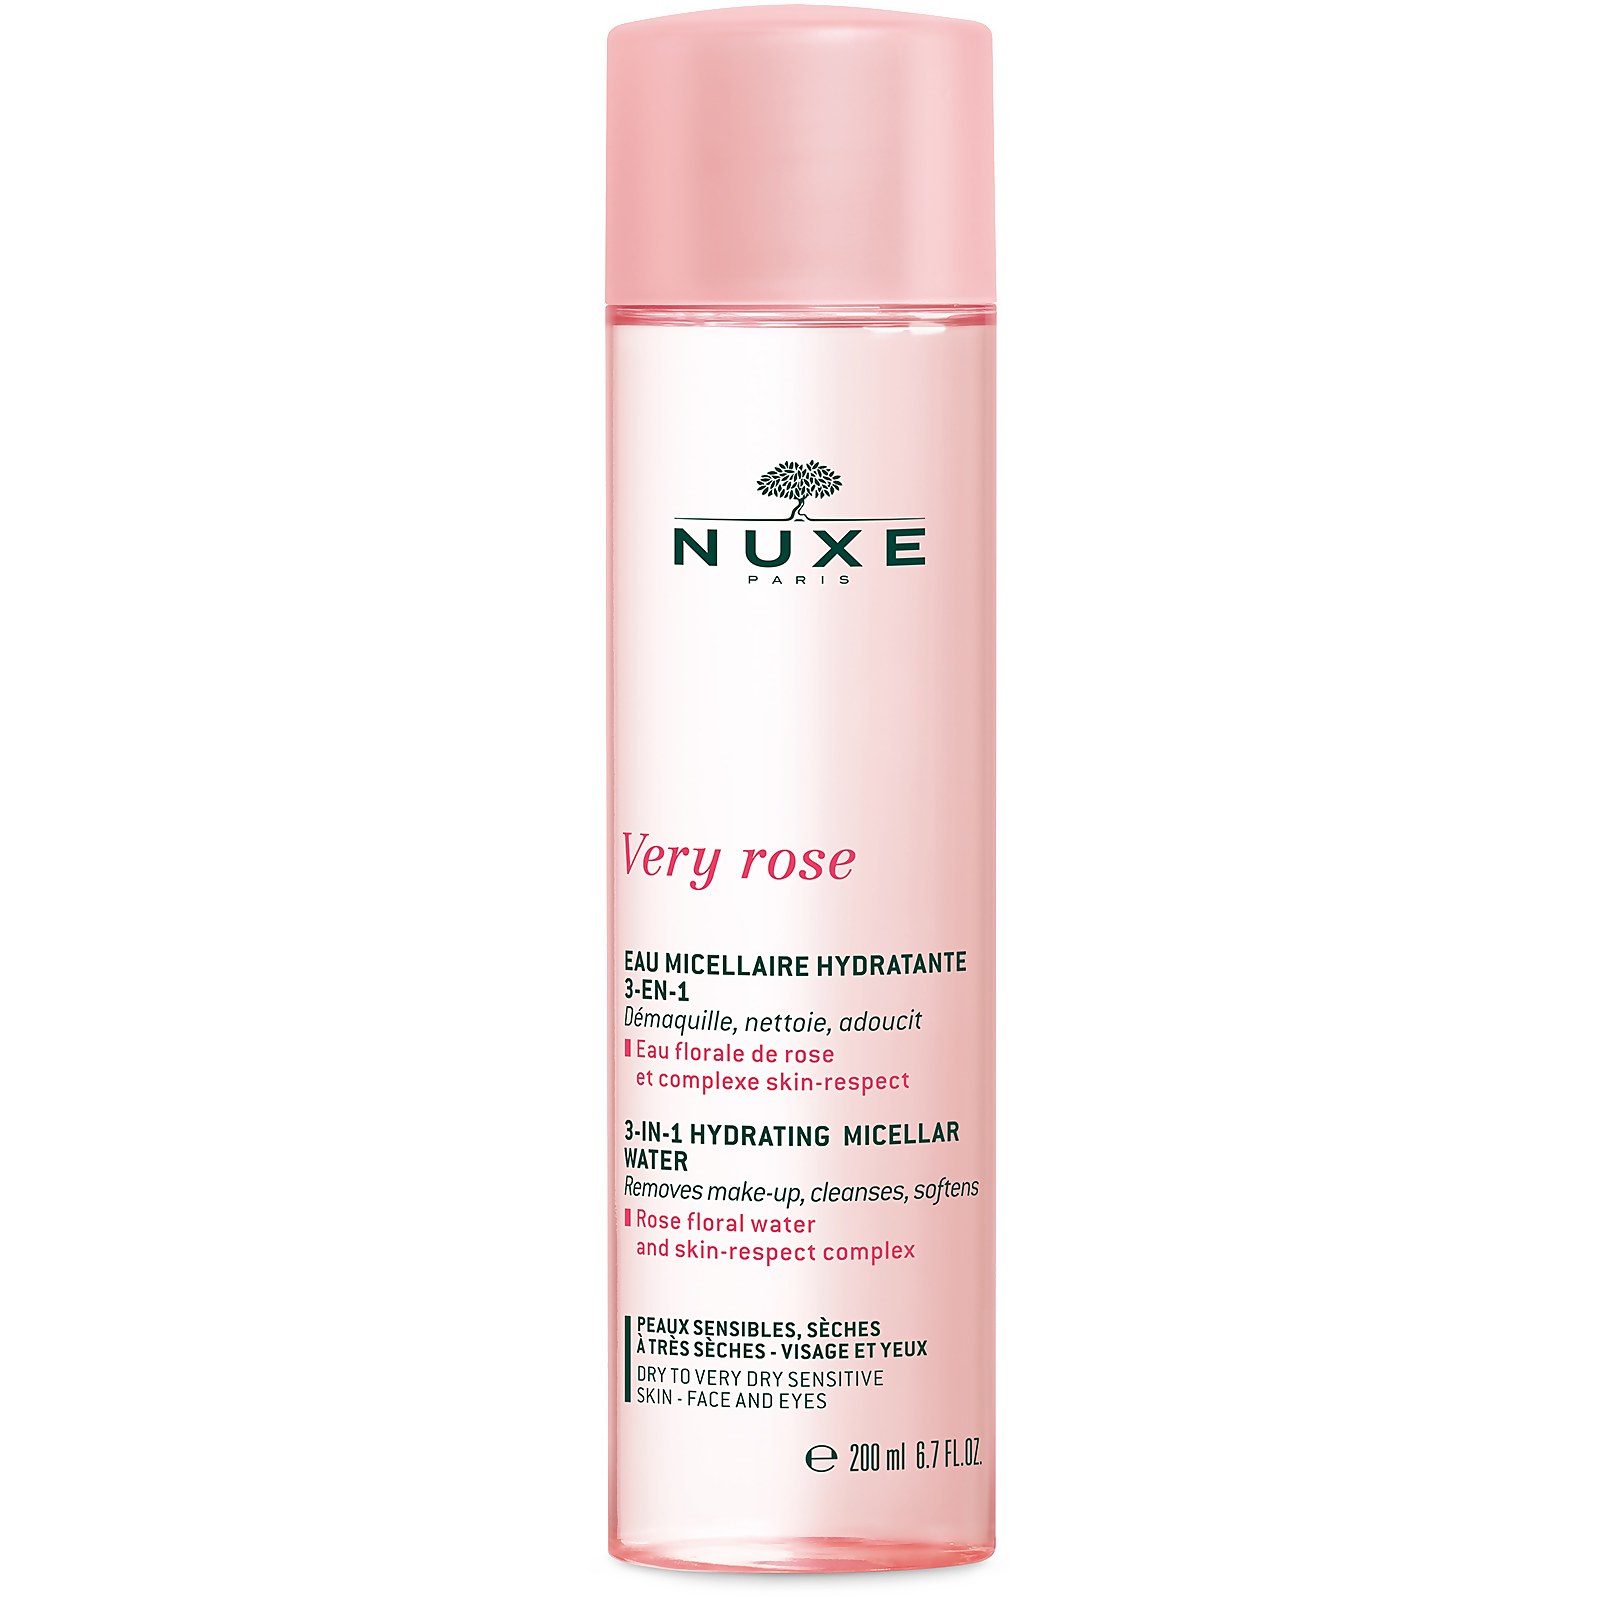 NUXE VERY ROSE 3-IN-1 HYDRATING MICELLAR WATER 200ML,VN051201